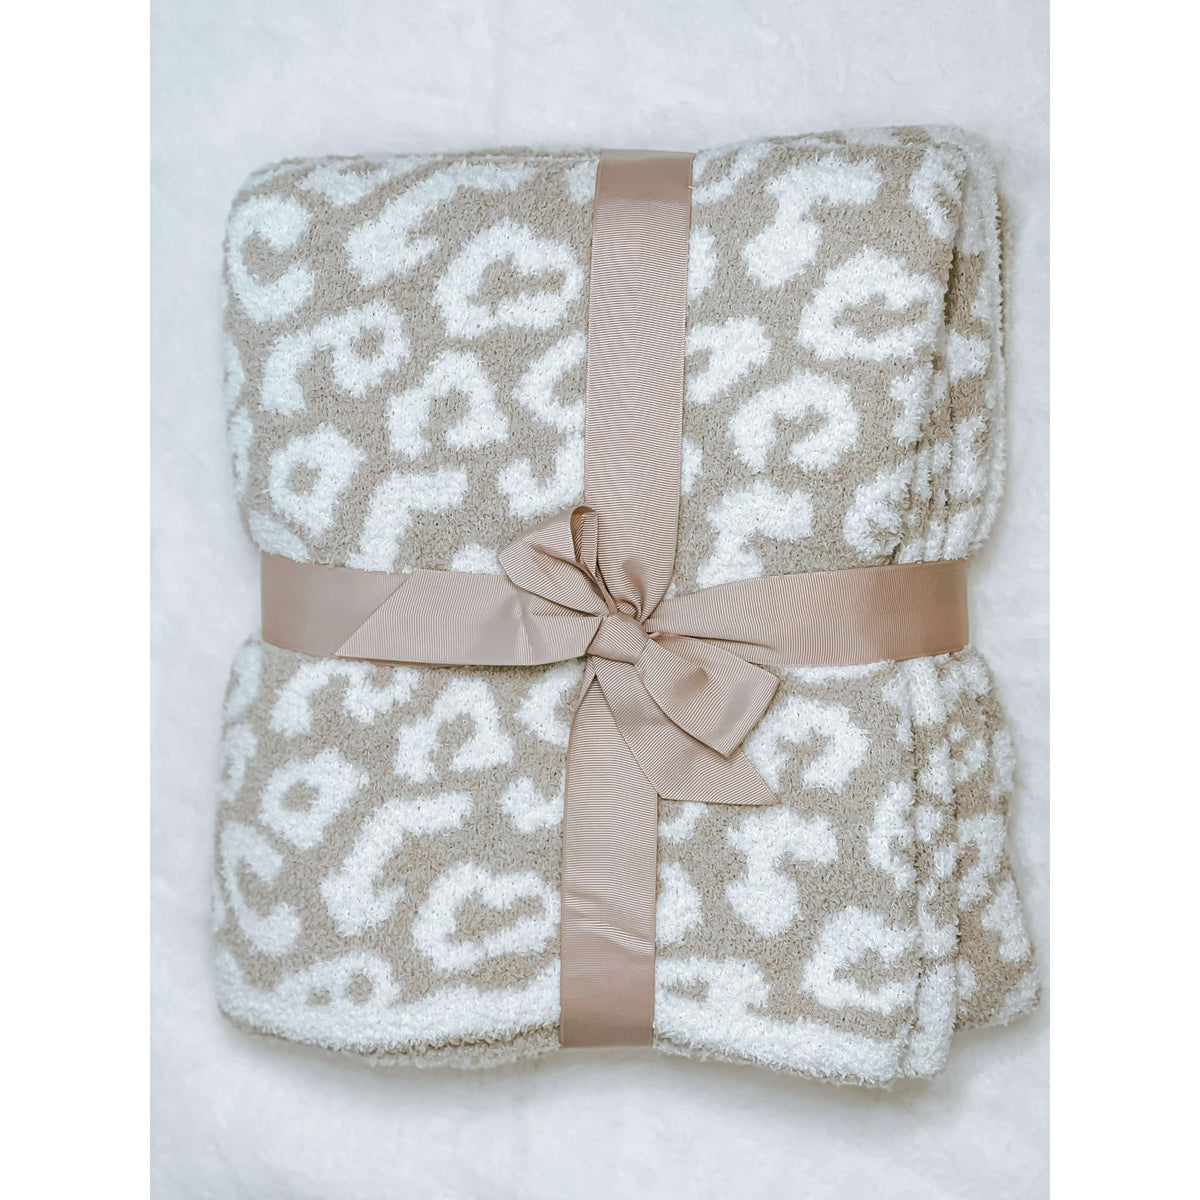 Heavenly Leopard Blanket - The Hive by Chris Jesselle